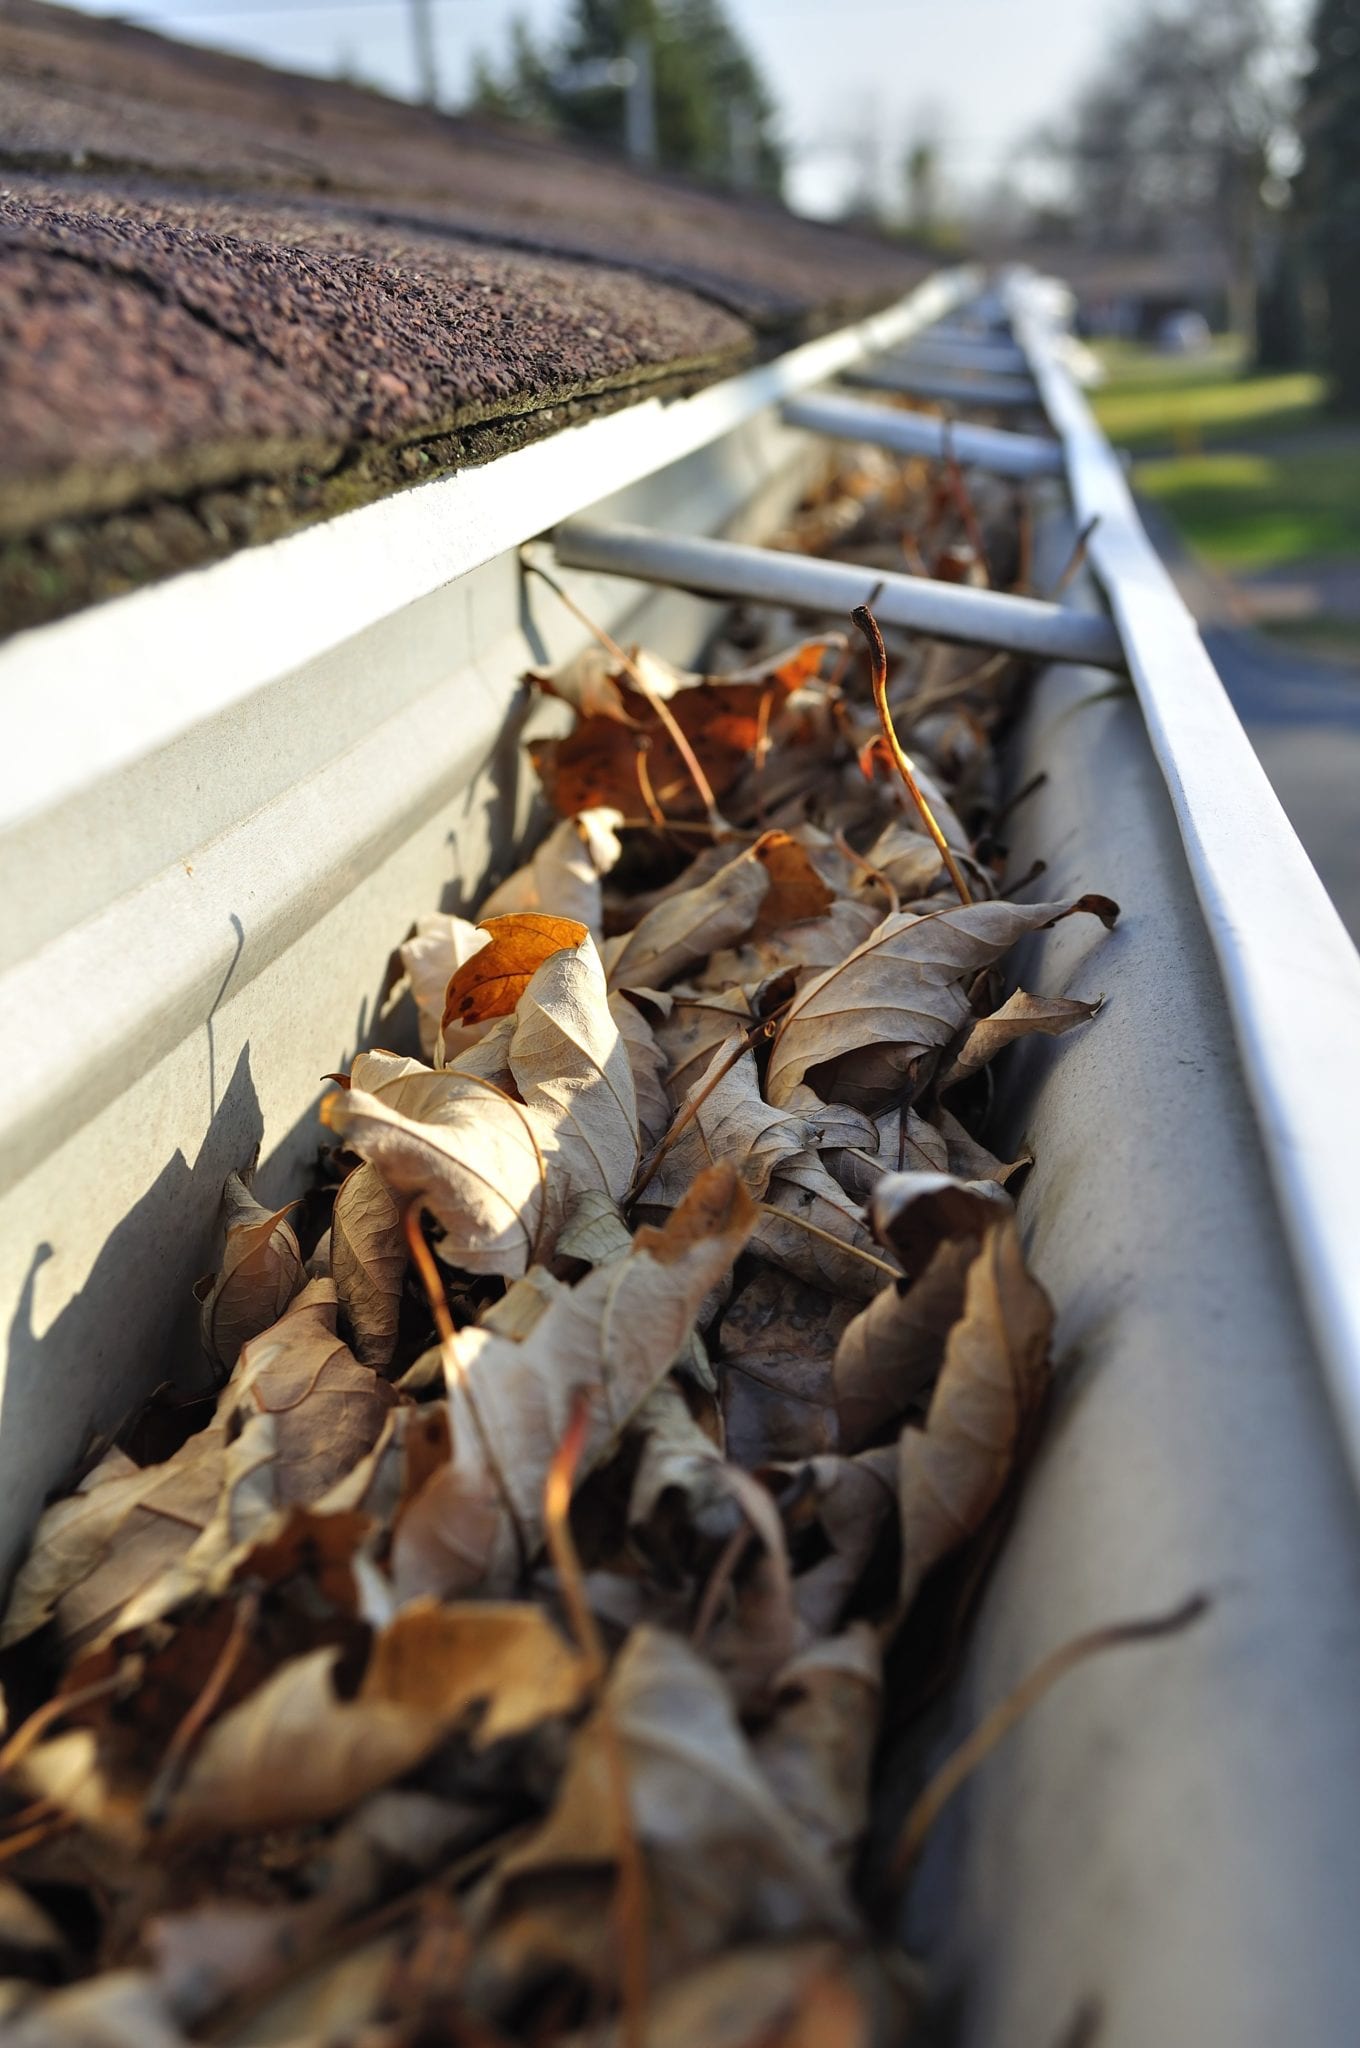 Gutter cleaning required 